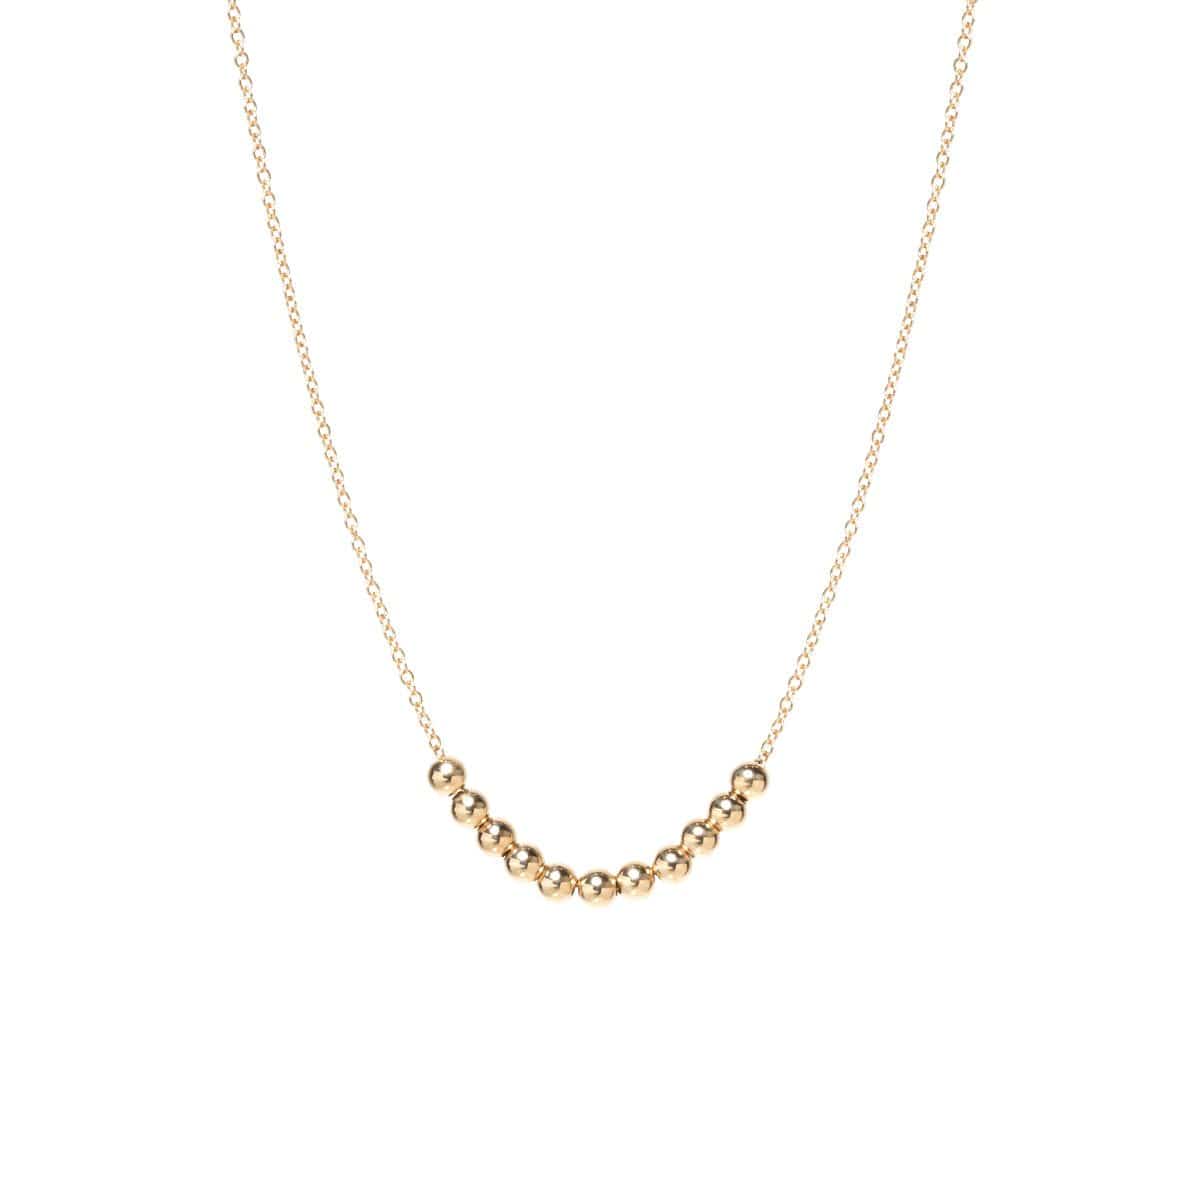 NKL-14K 14K Gold Chain Necklace with 11 3mm Gold Beads